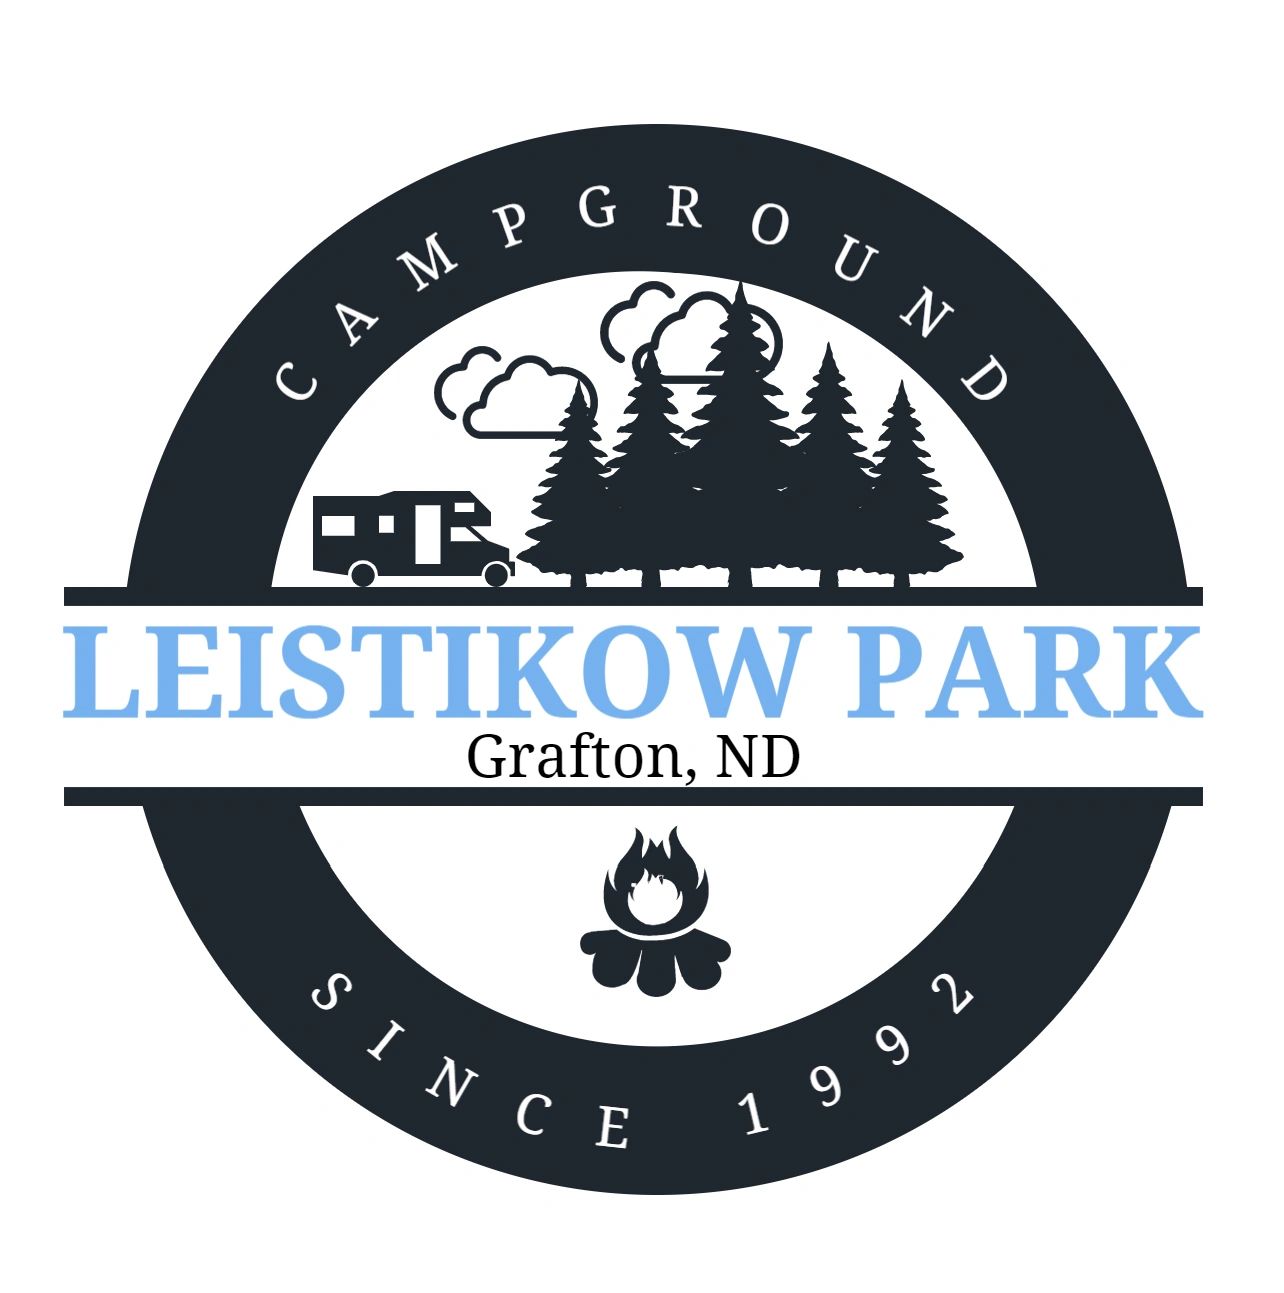 Leistikow Park Campground Grafton, ND Logo. Established 1992 by Grafton Parks and Recreation.
